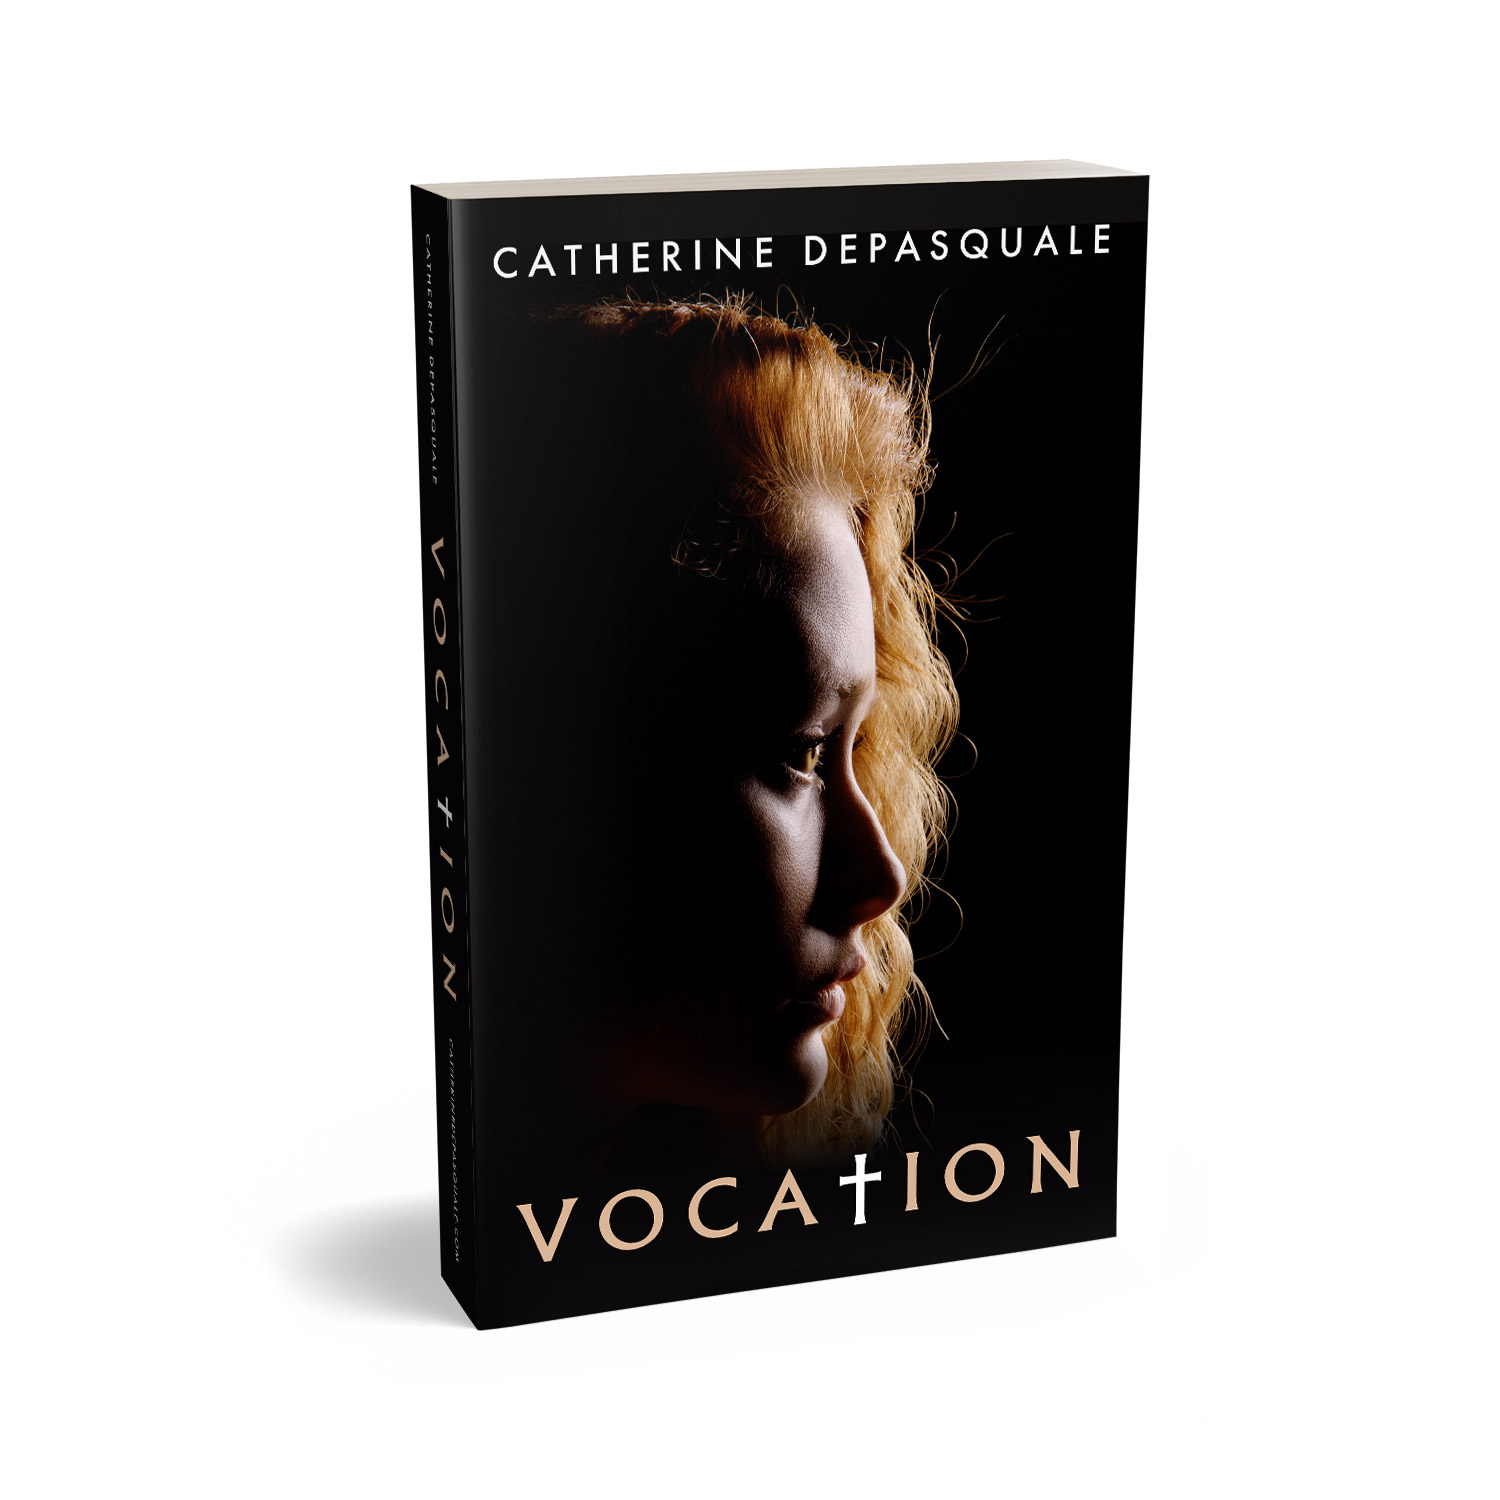 'Vocation' is a great faith-focussed modern novel. The author is Catherine DePasquale. The book cover design and interior formatting are by Mark Thomas. To learn more about what Mark could do for your book, please visit coverness.com.